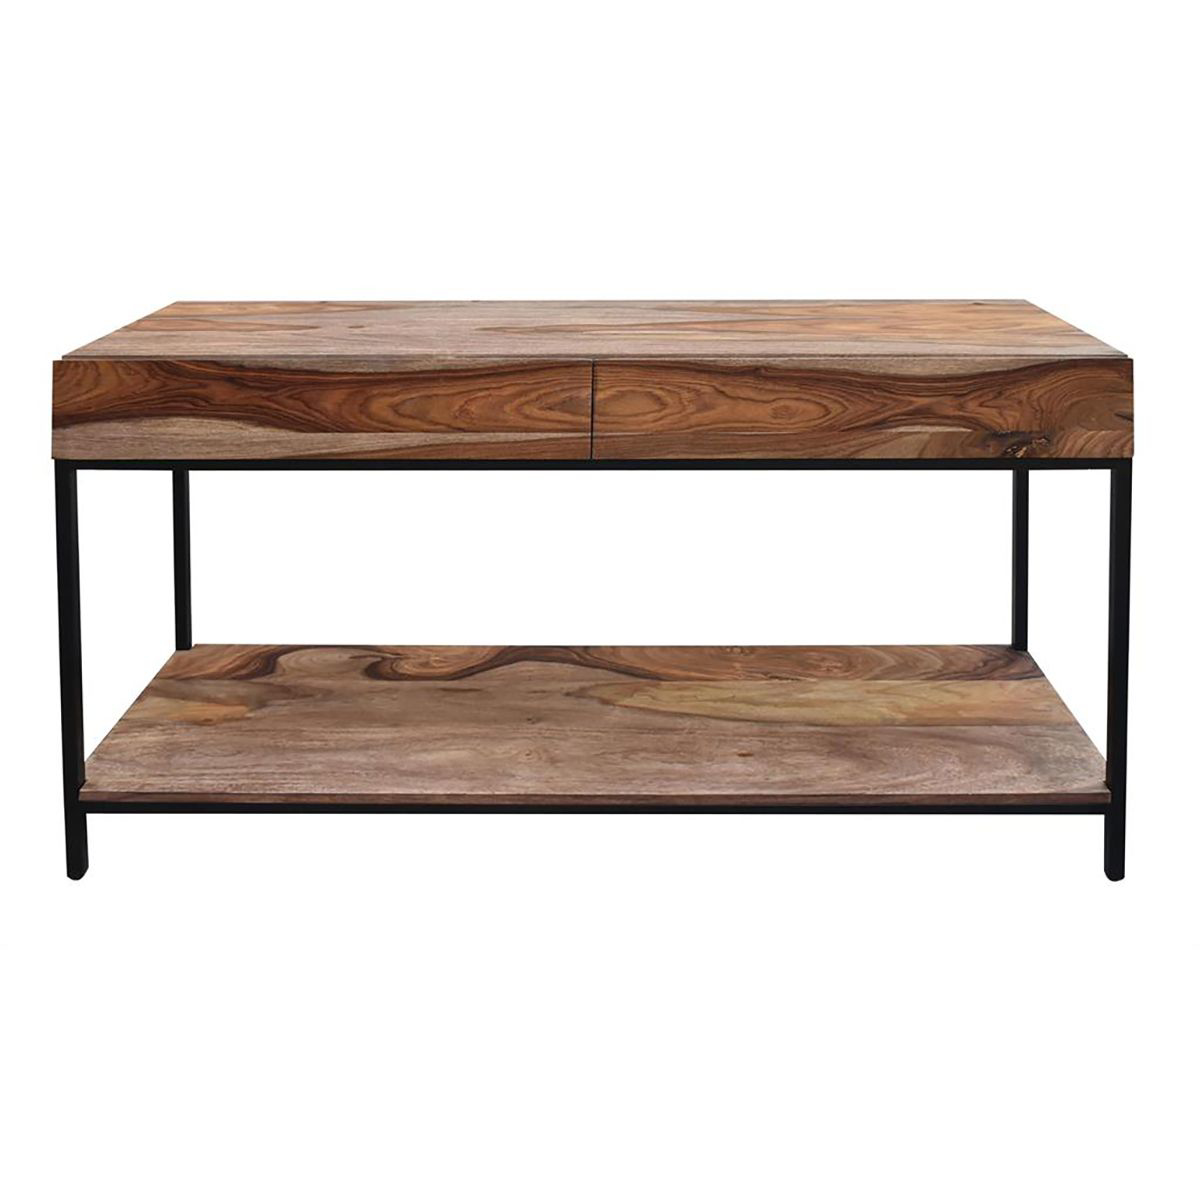 Picture of 2 DRW CONSOLE TABLE